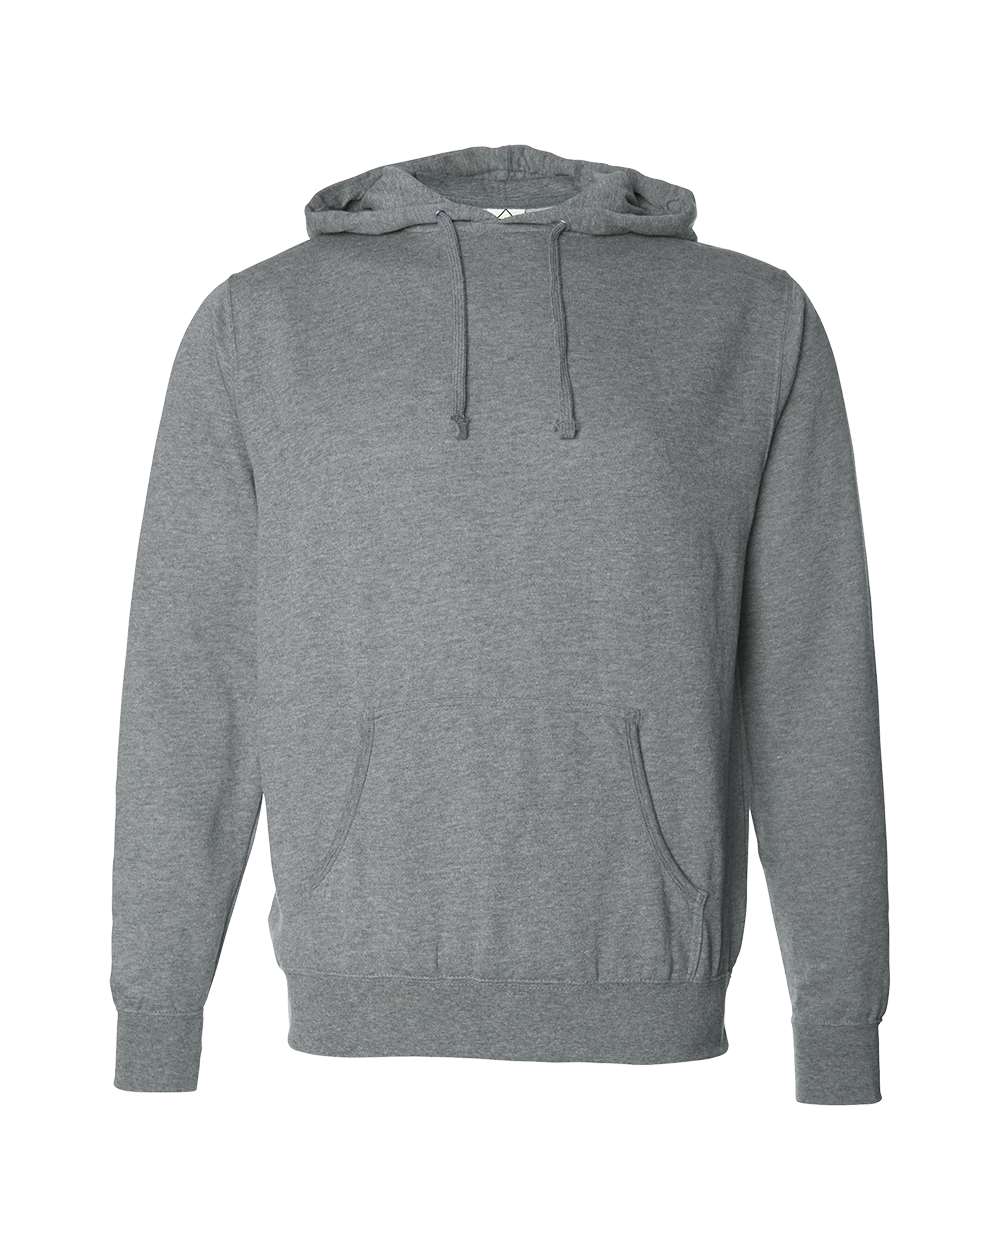 Independent Trading Co. - Hooded Sweatshirt